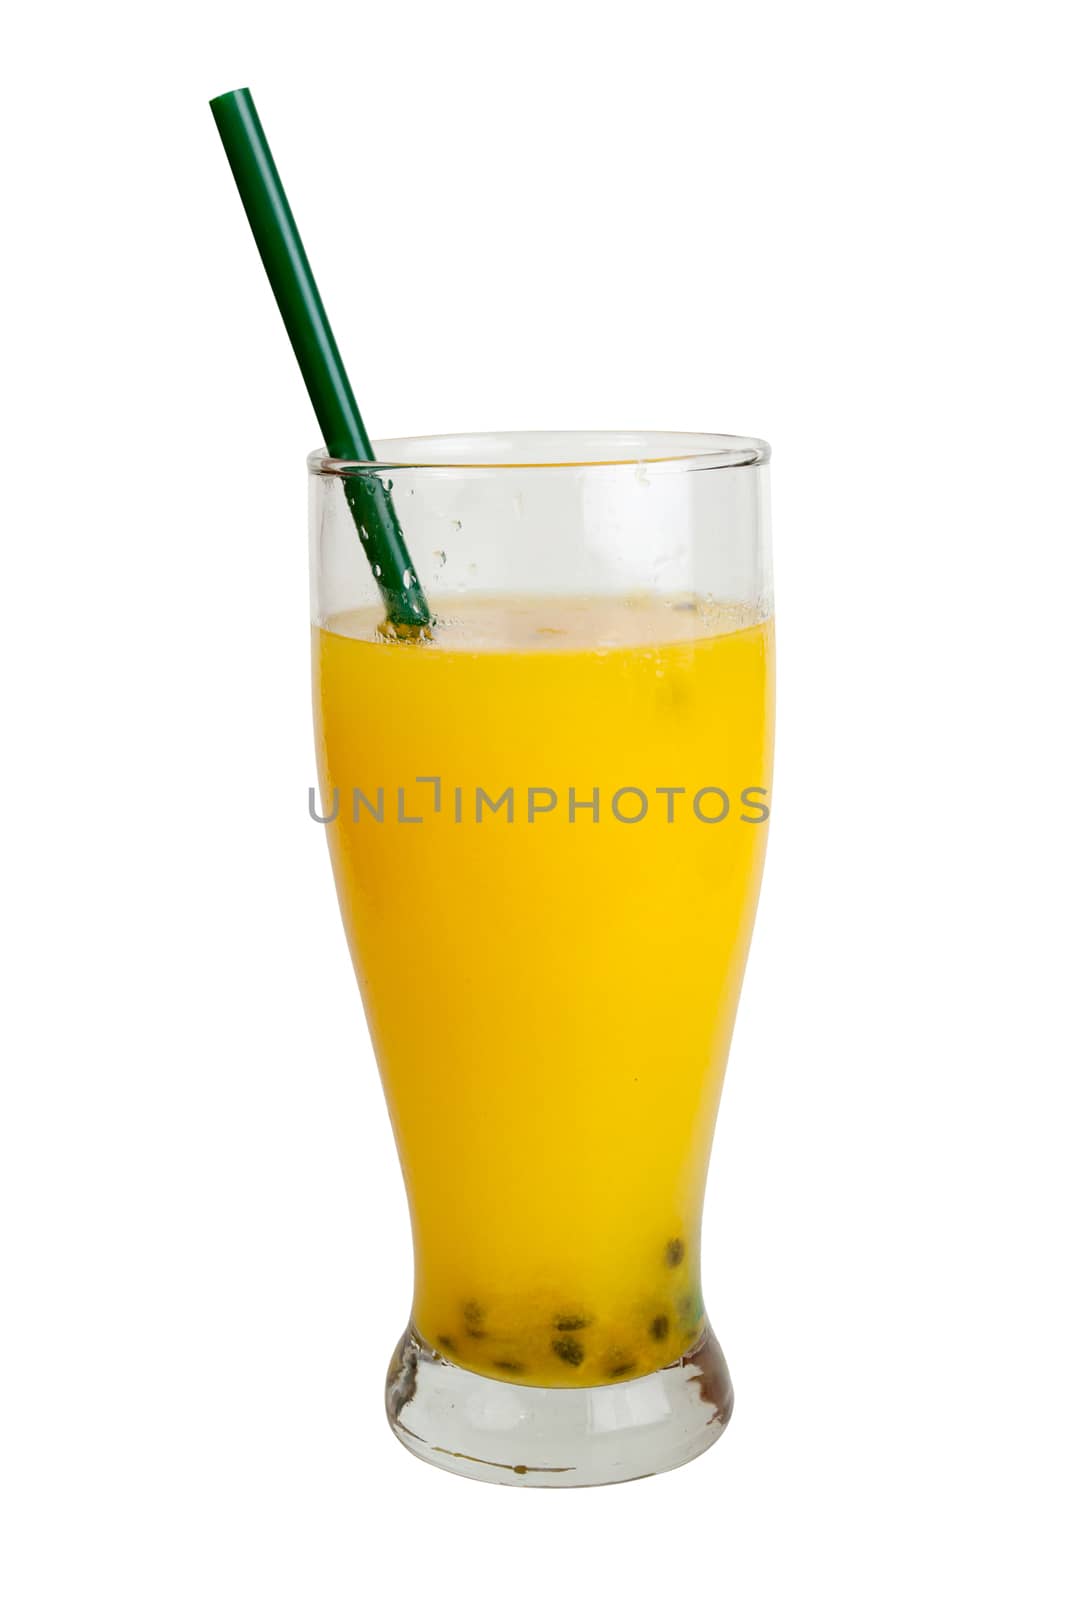 Passion fruit juice in glass. Isolated on white with work paths